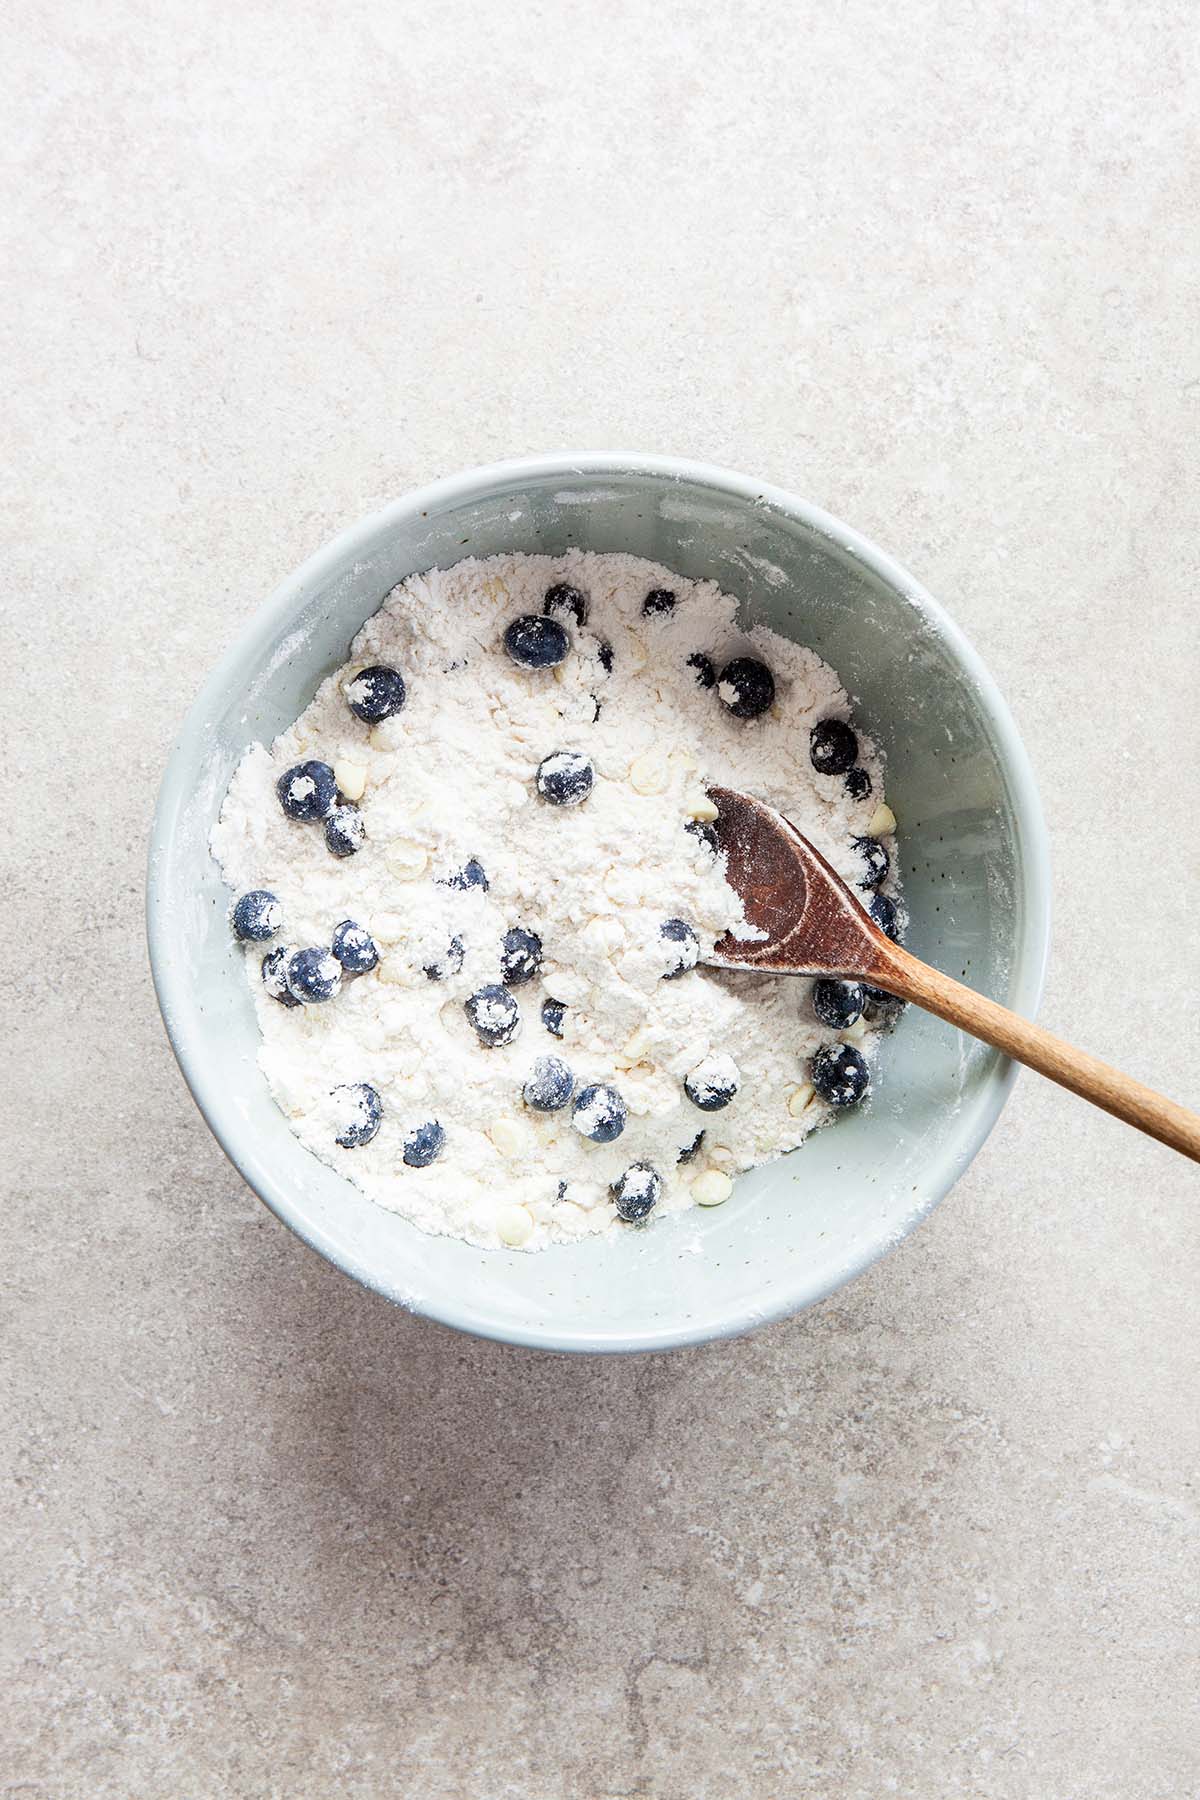 A bowl with flour, blueberries, and white chocolate chips just stirred with a wooden spoon that's inside the bowl.